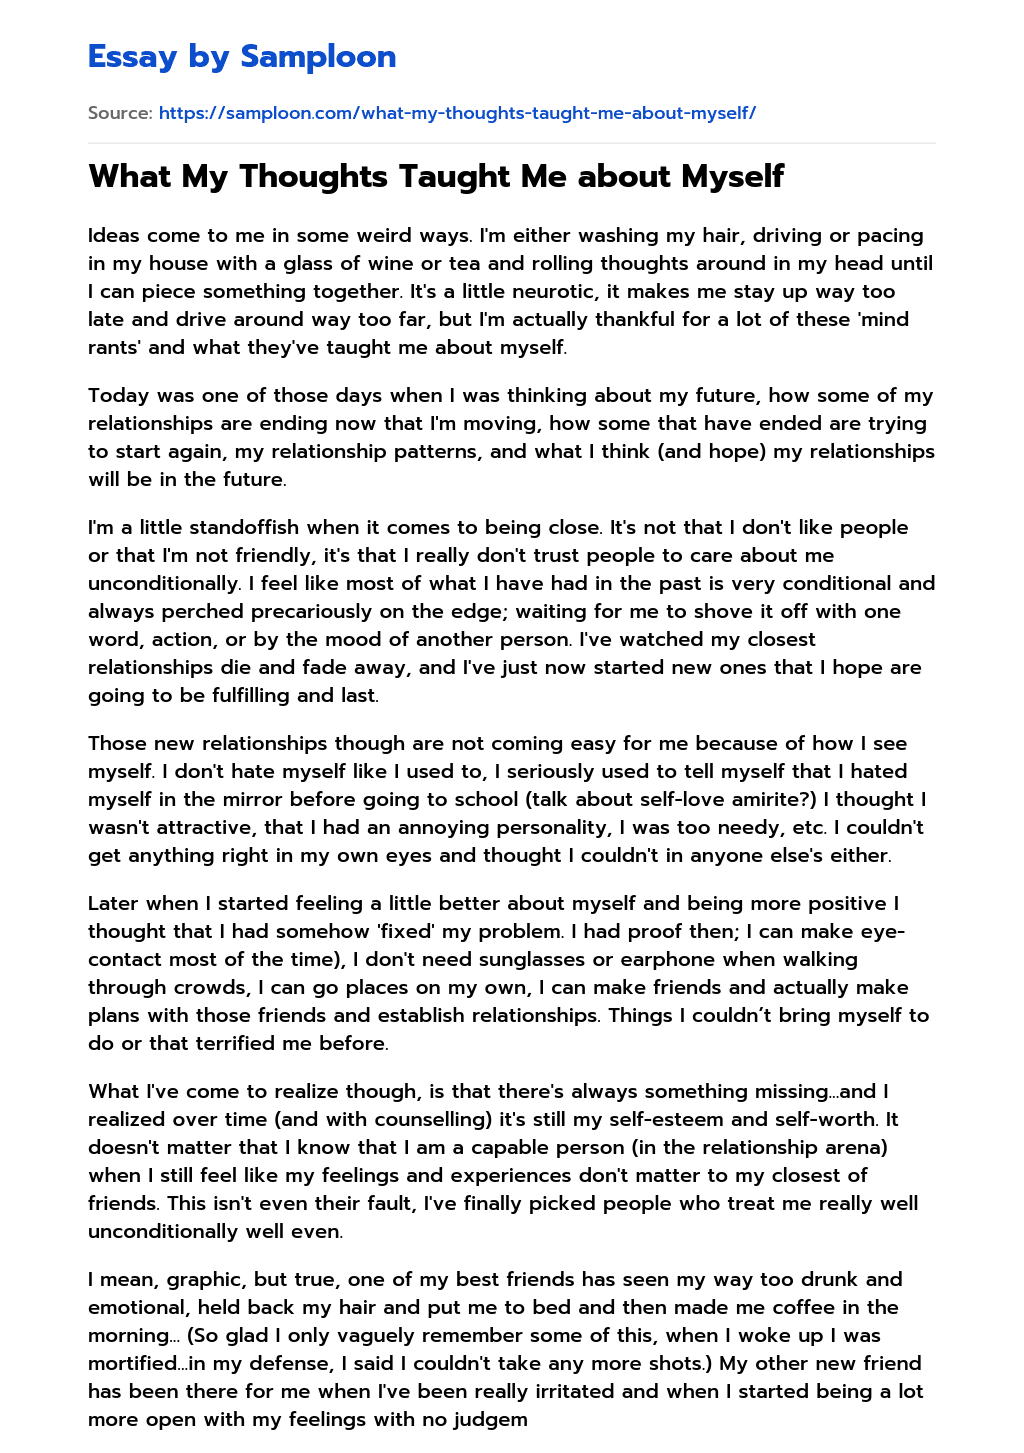 What My Thoughts Taught Me about Myself essay